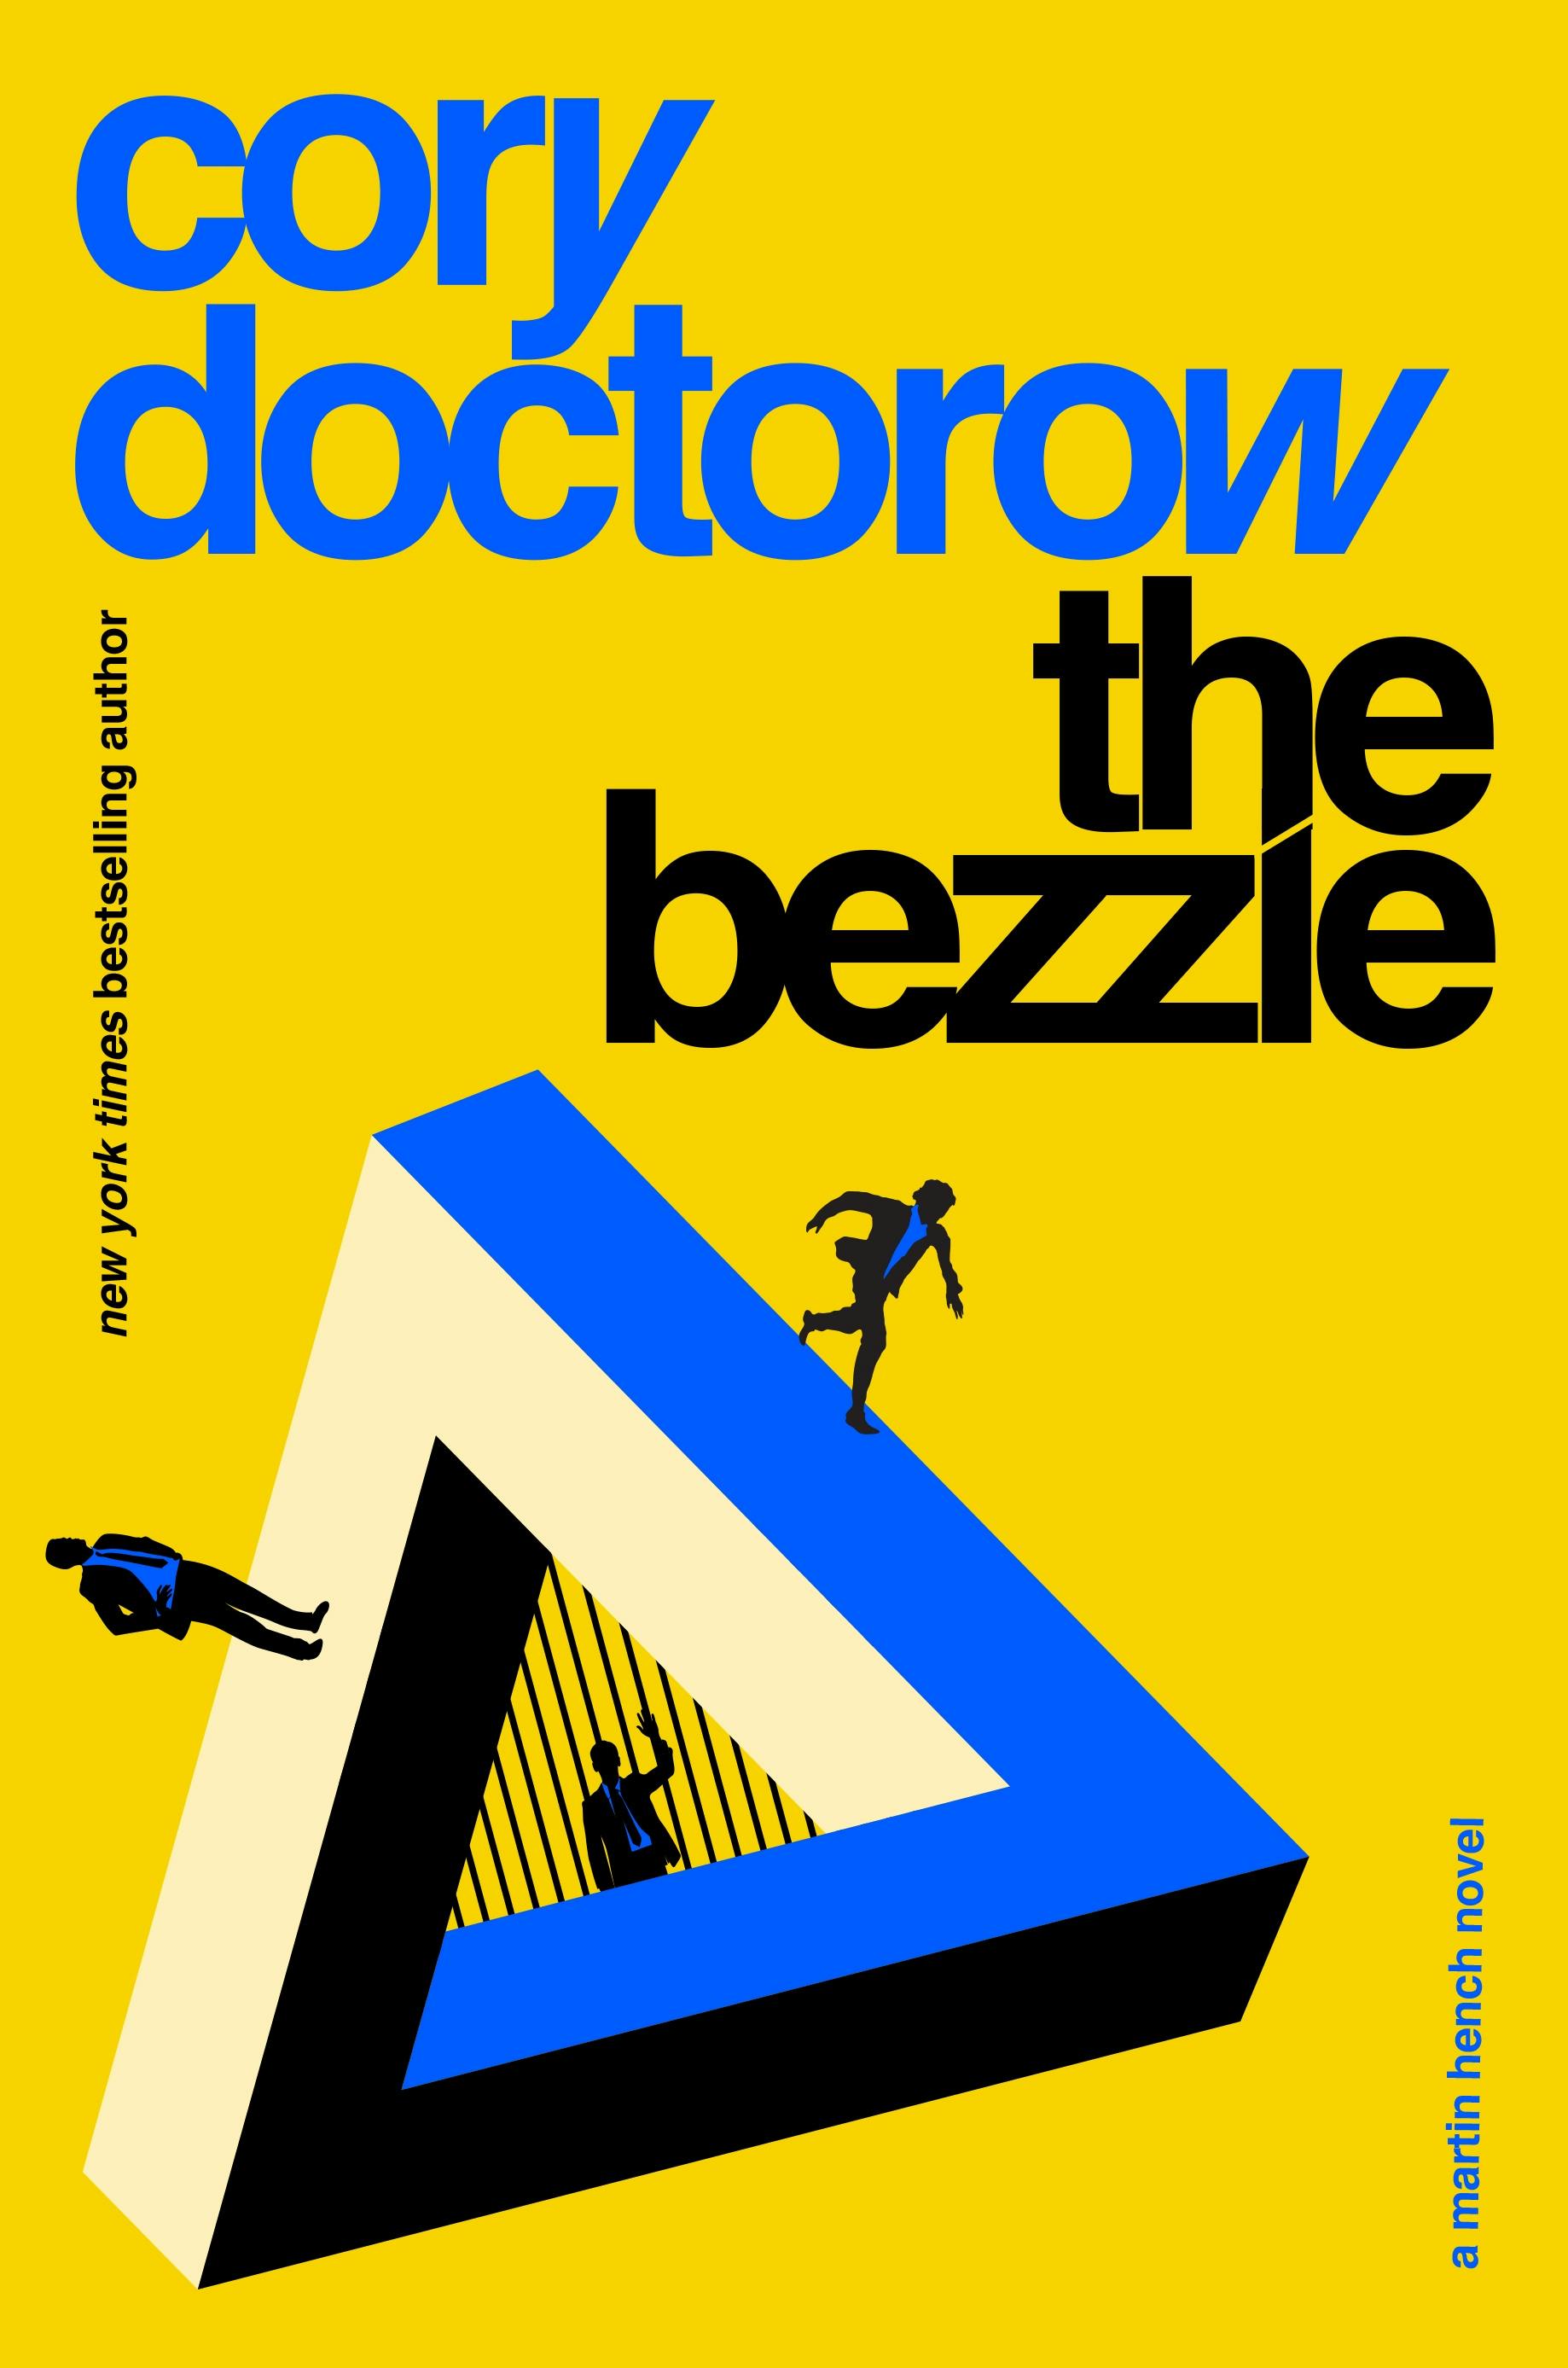 Cover for the book titled as: The Bezzle